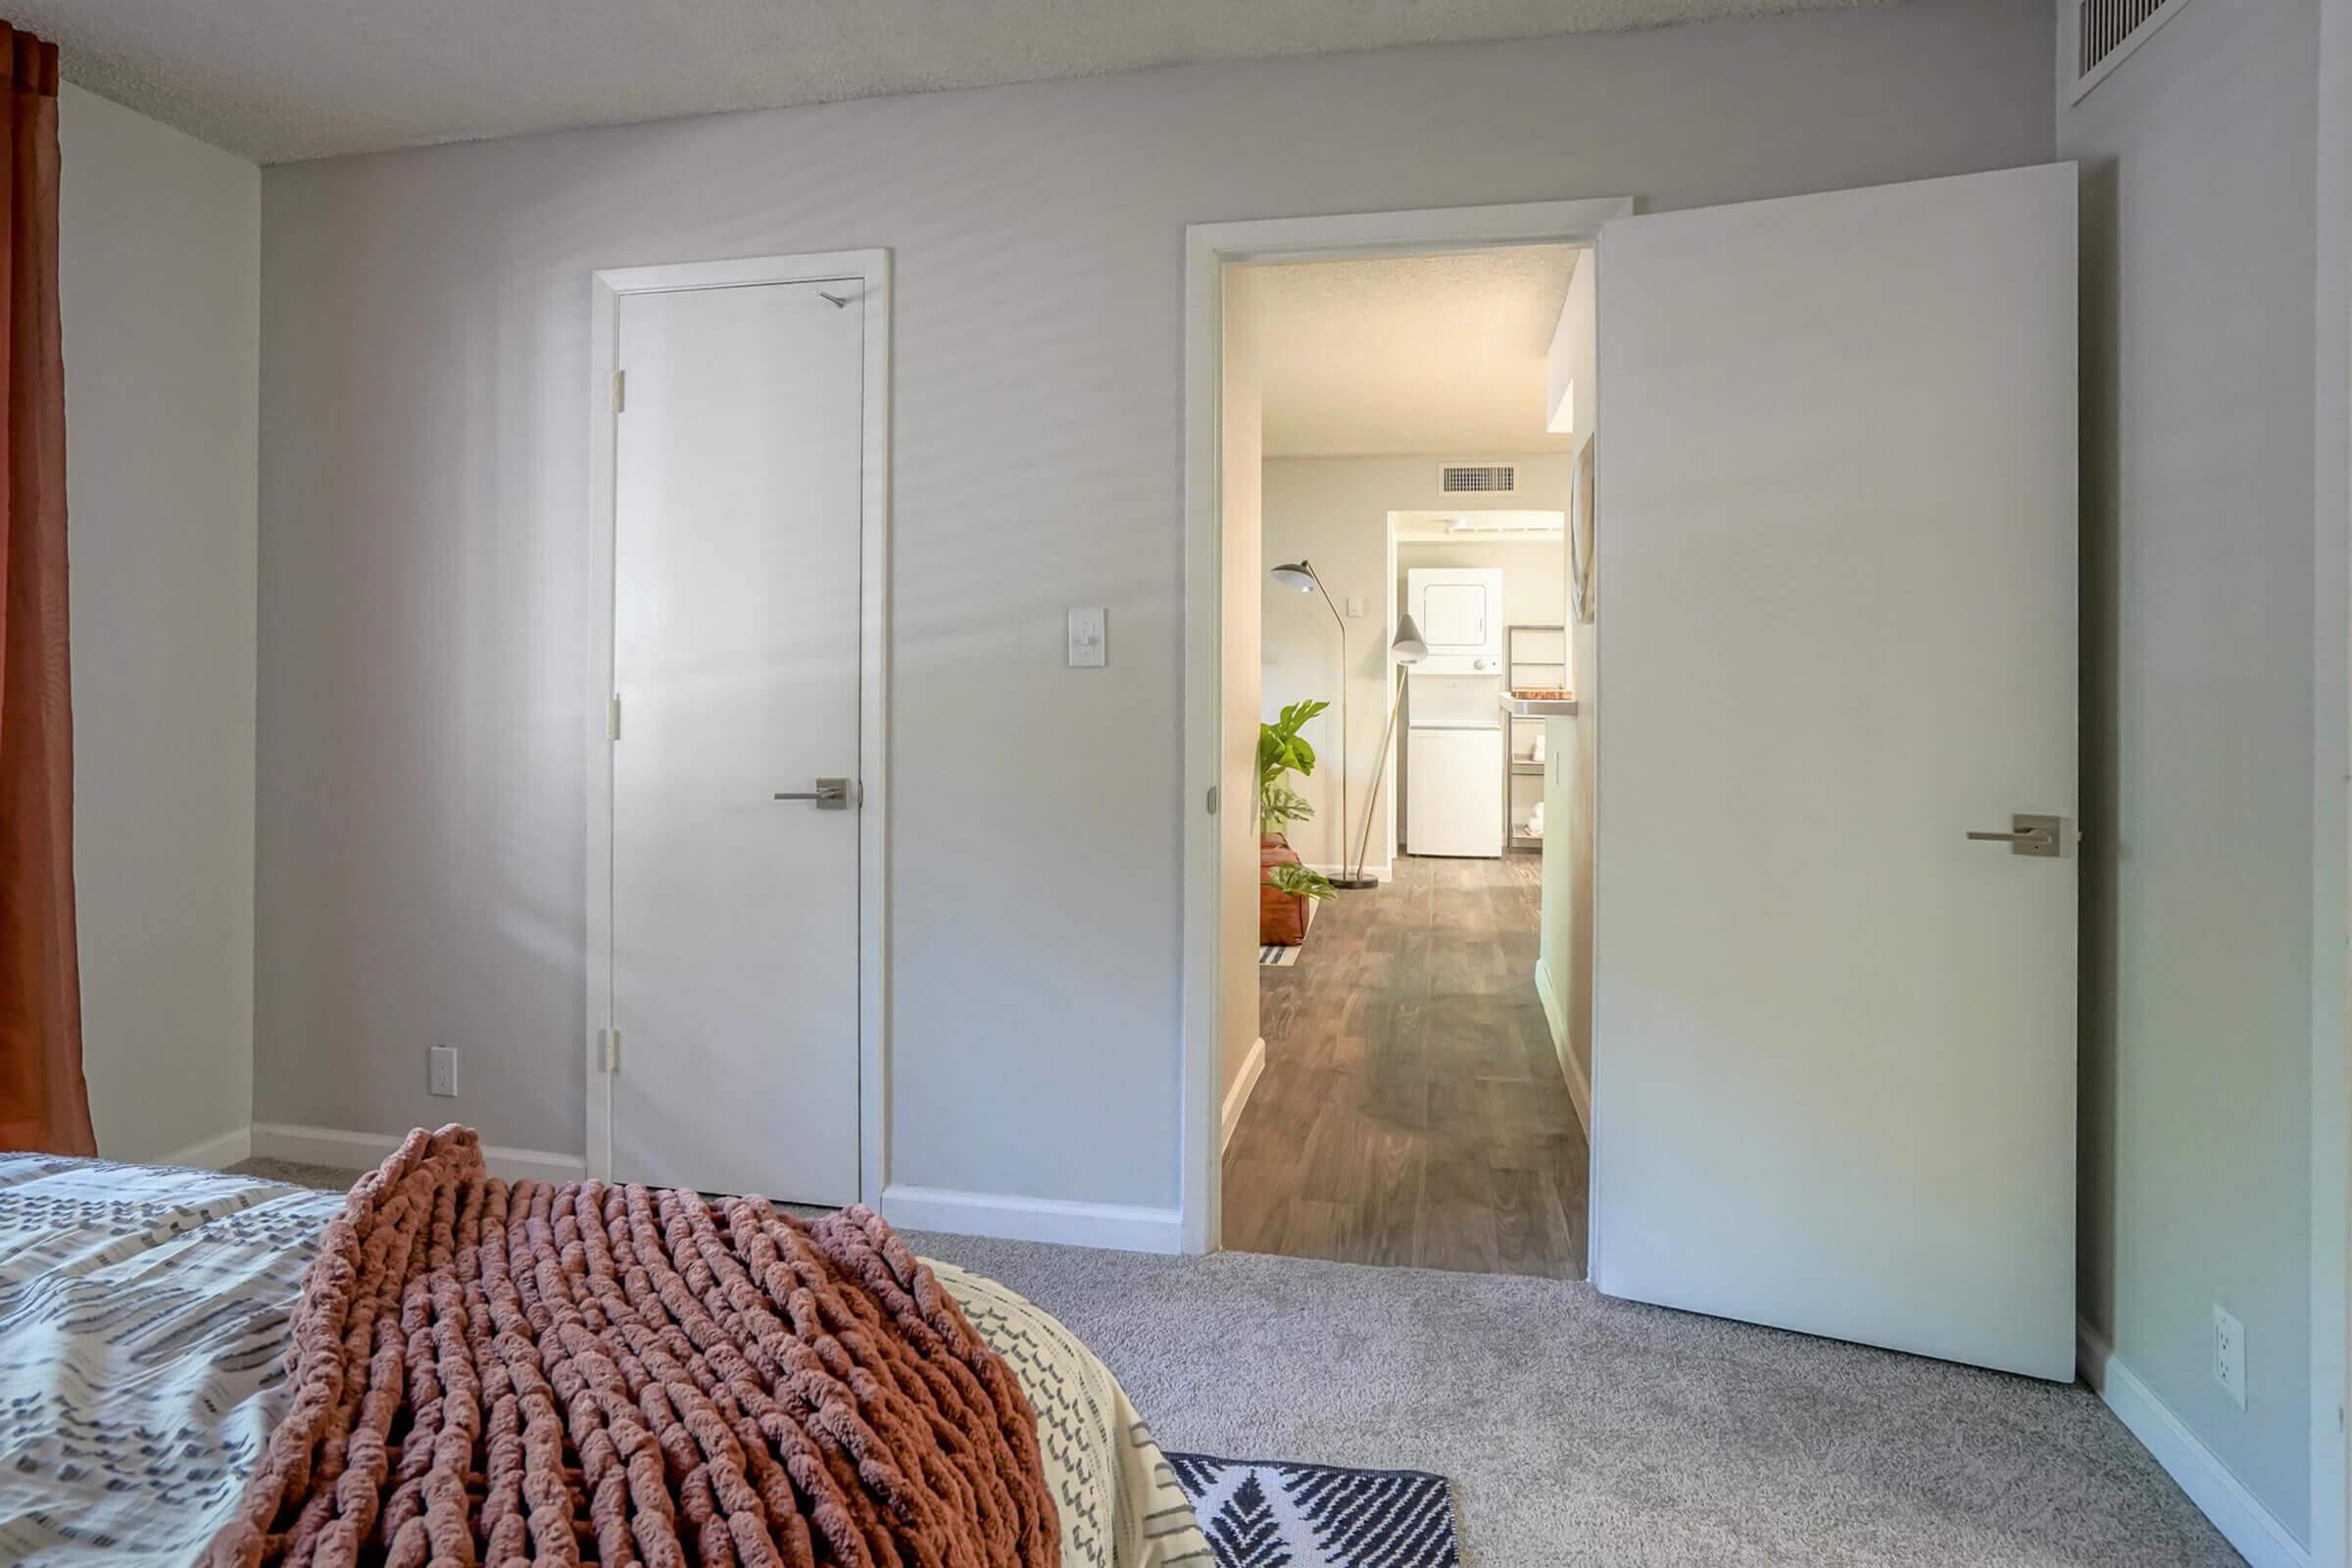 Large Bedroom with Fresh Carpeting - Treehouse Apartments - Albuquerque - New Mexico